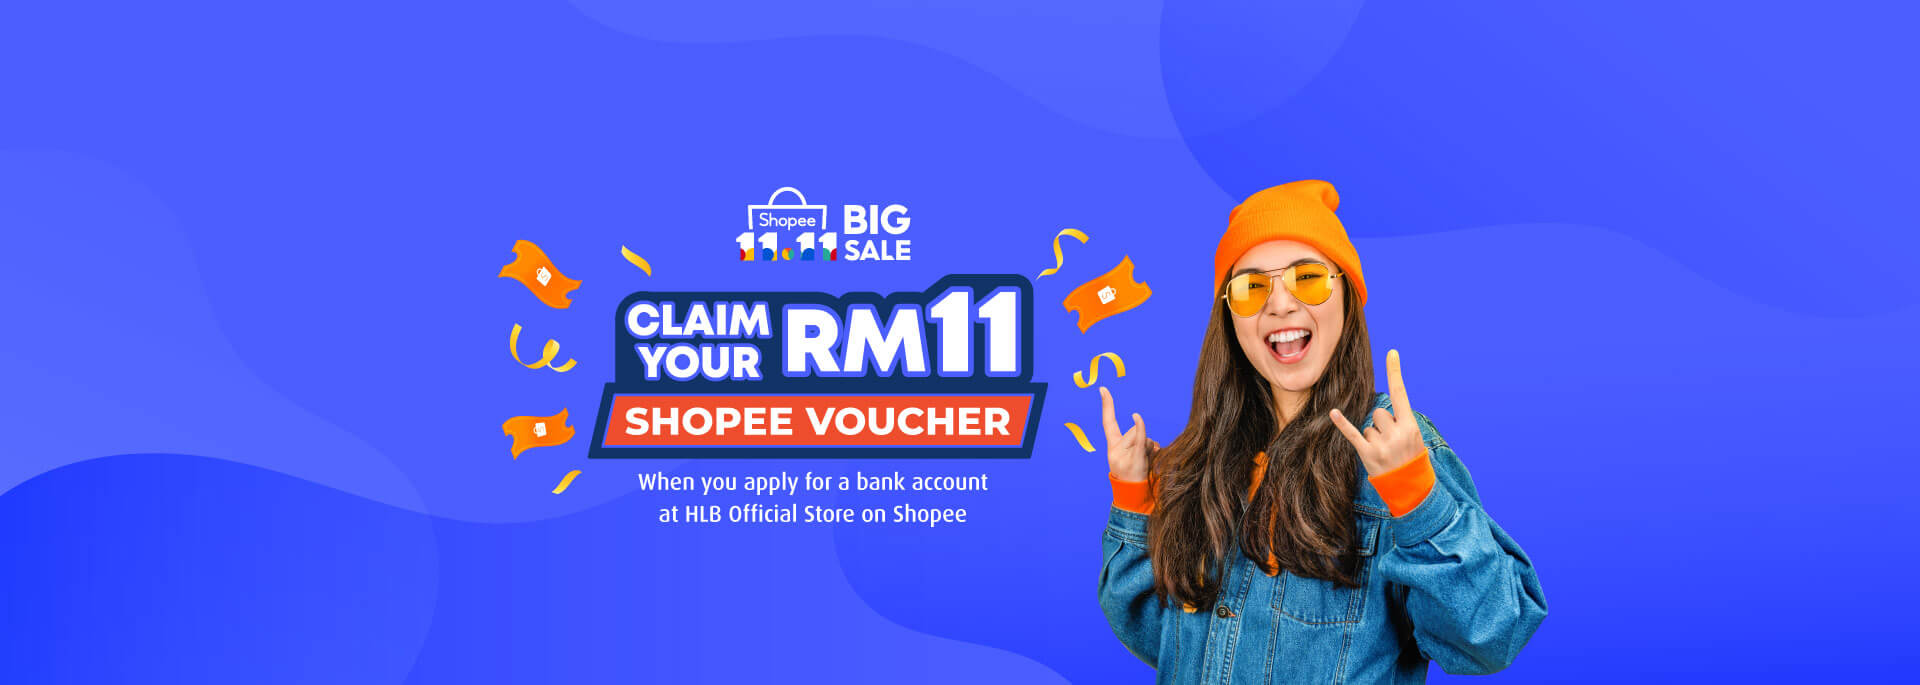 Enjoy RM11 Shopee voucher when you purchase and open an account at HLB Official Store on Shopee